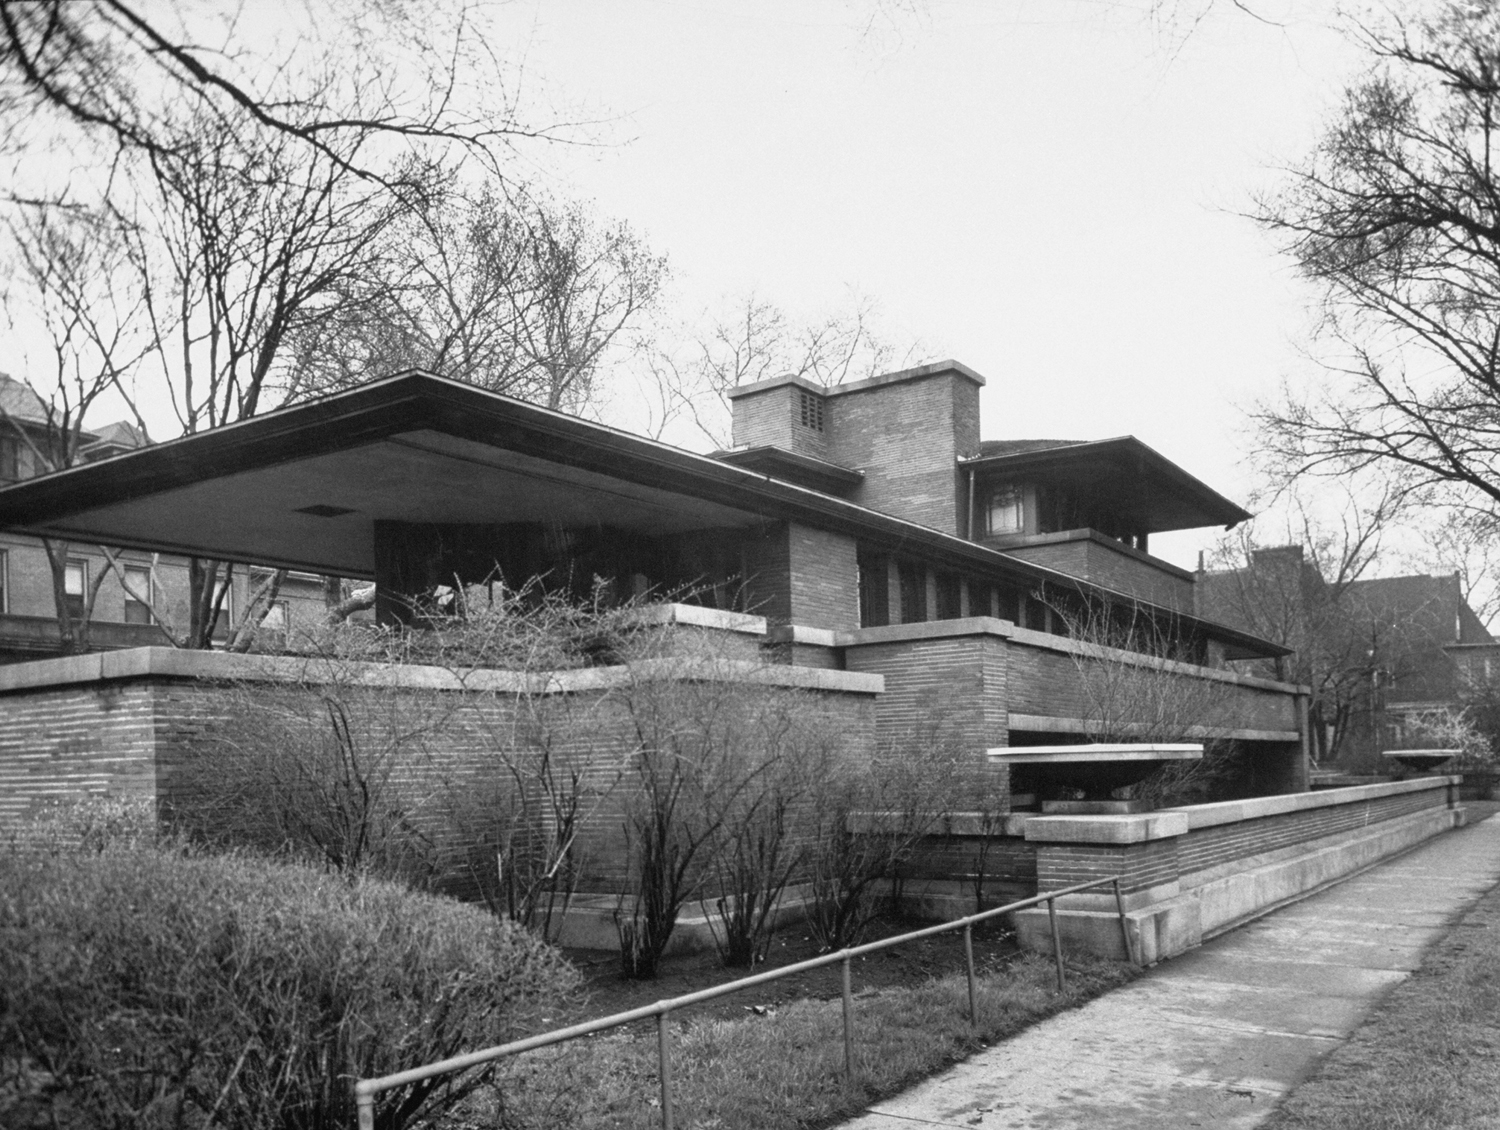 Robie House in Hyde Park, Chicago, a masterpiece of the "Prairie" style, designed by Frank Lloyd Wright. (Completed 1910.)